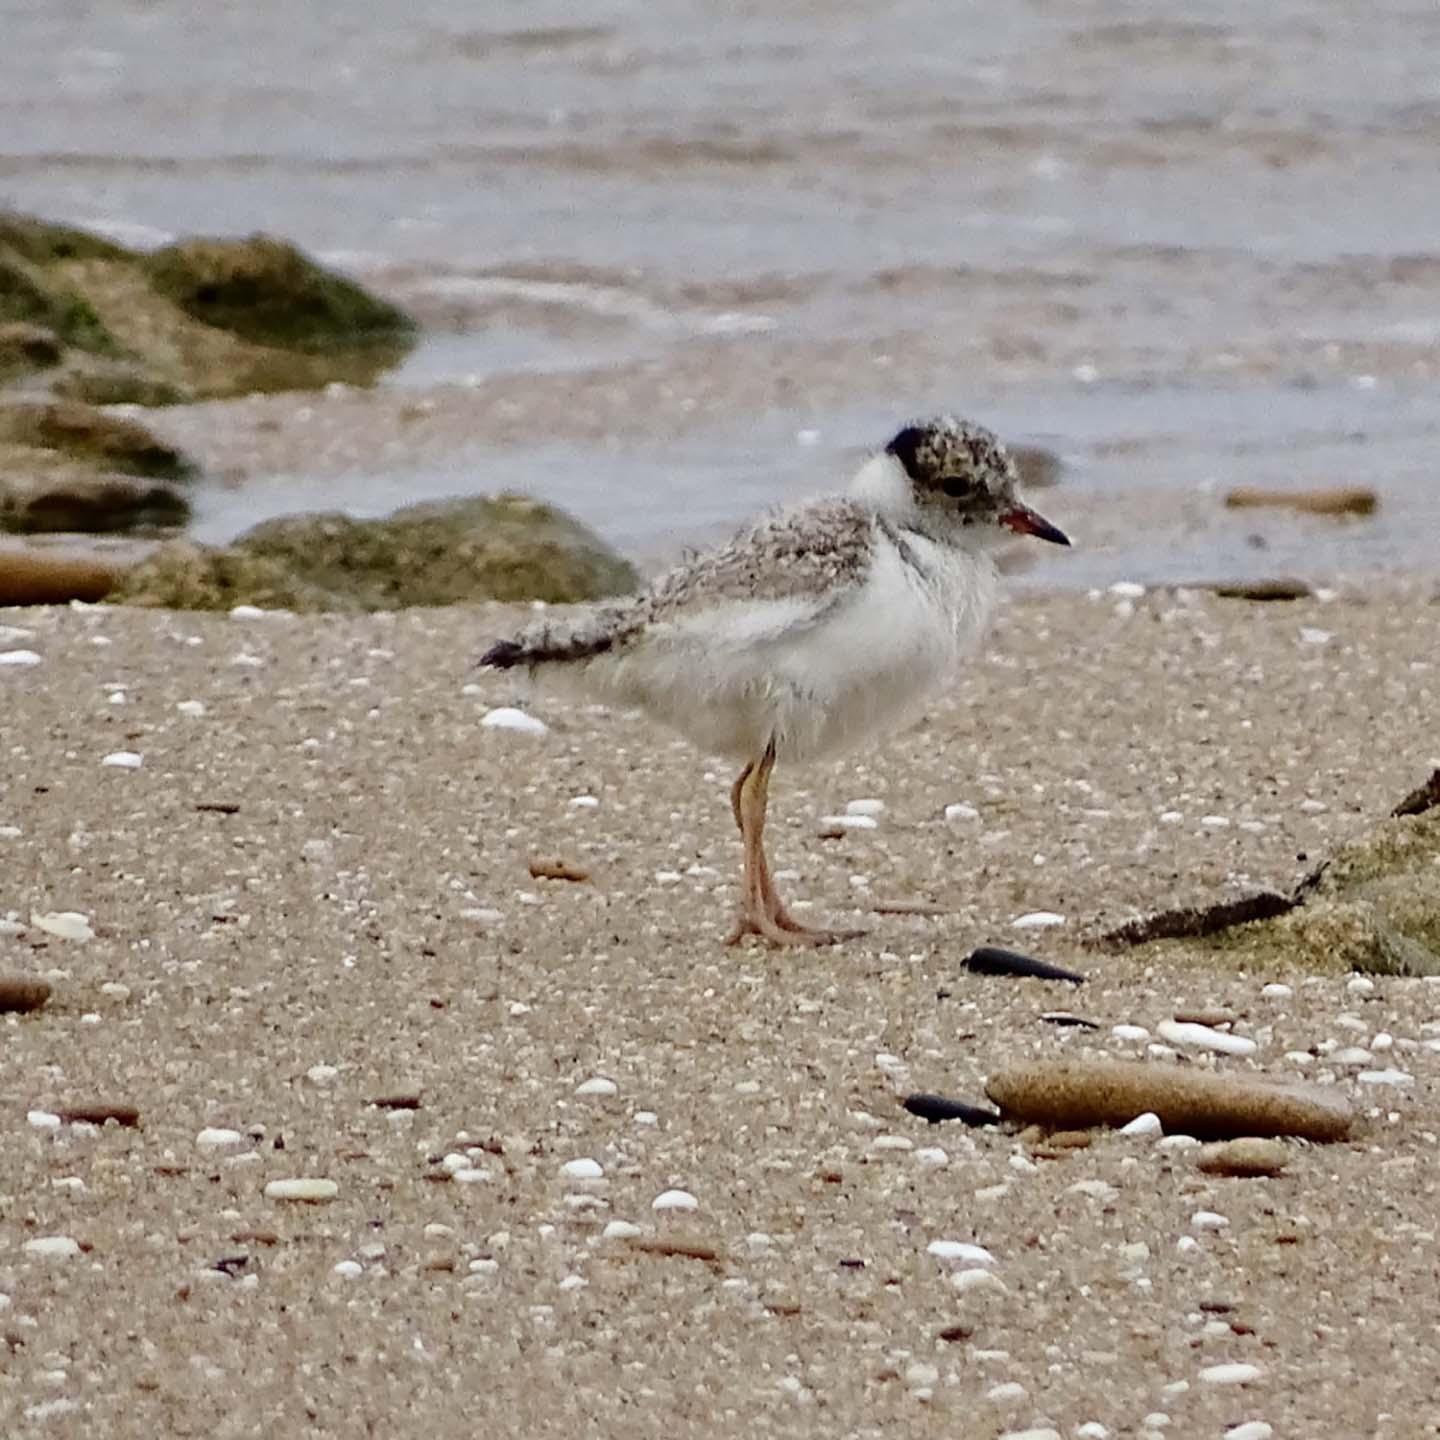 A hooded plover on the sand at the waters edge